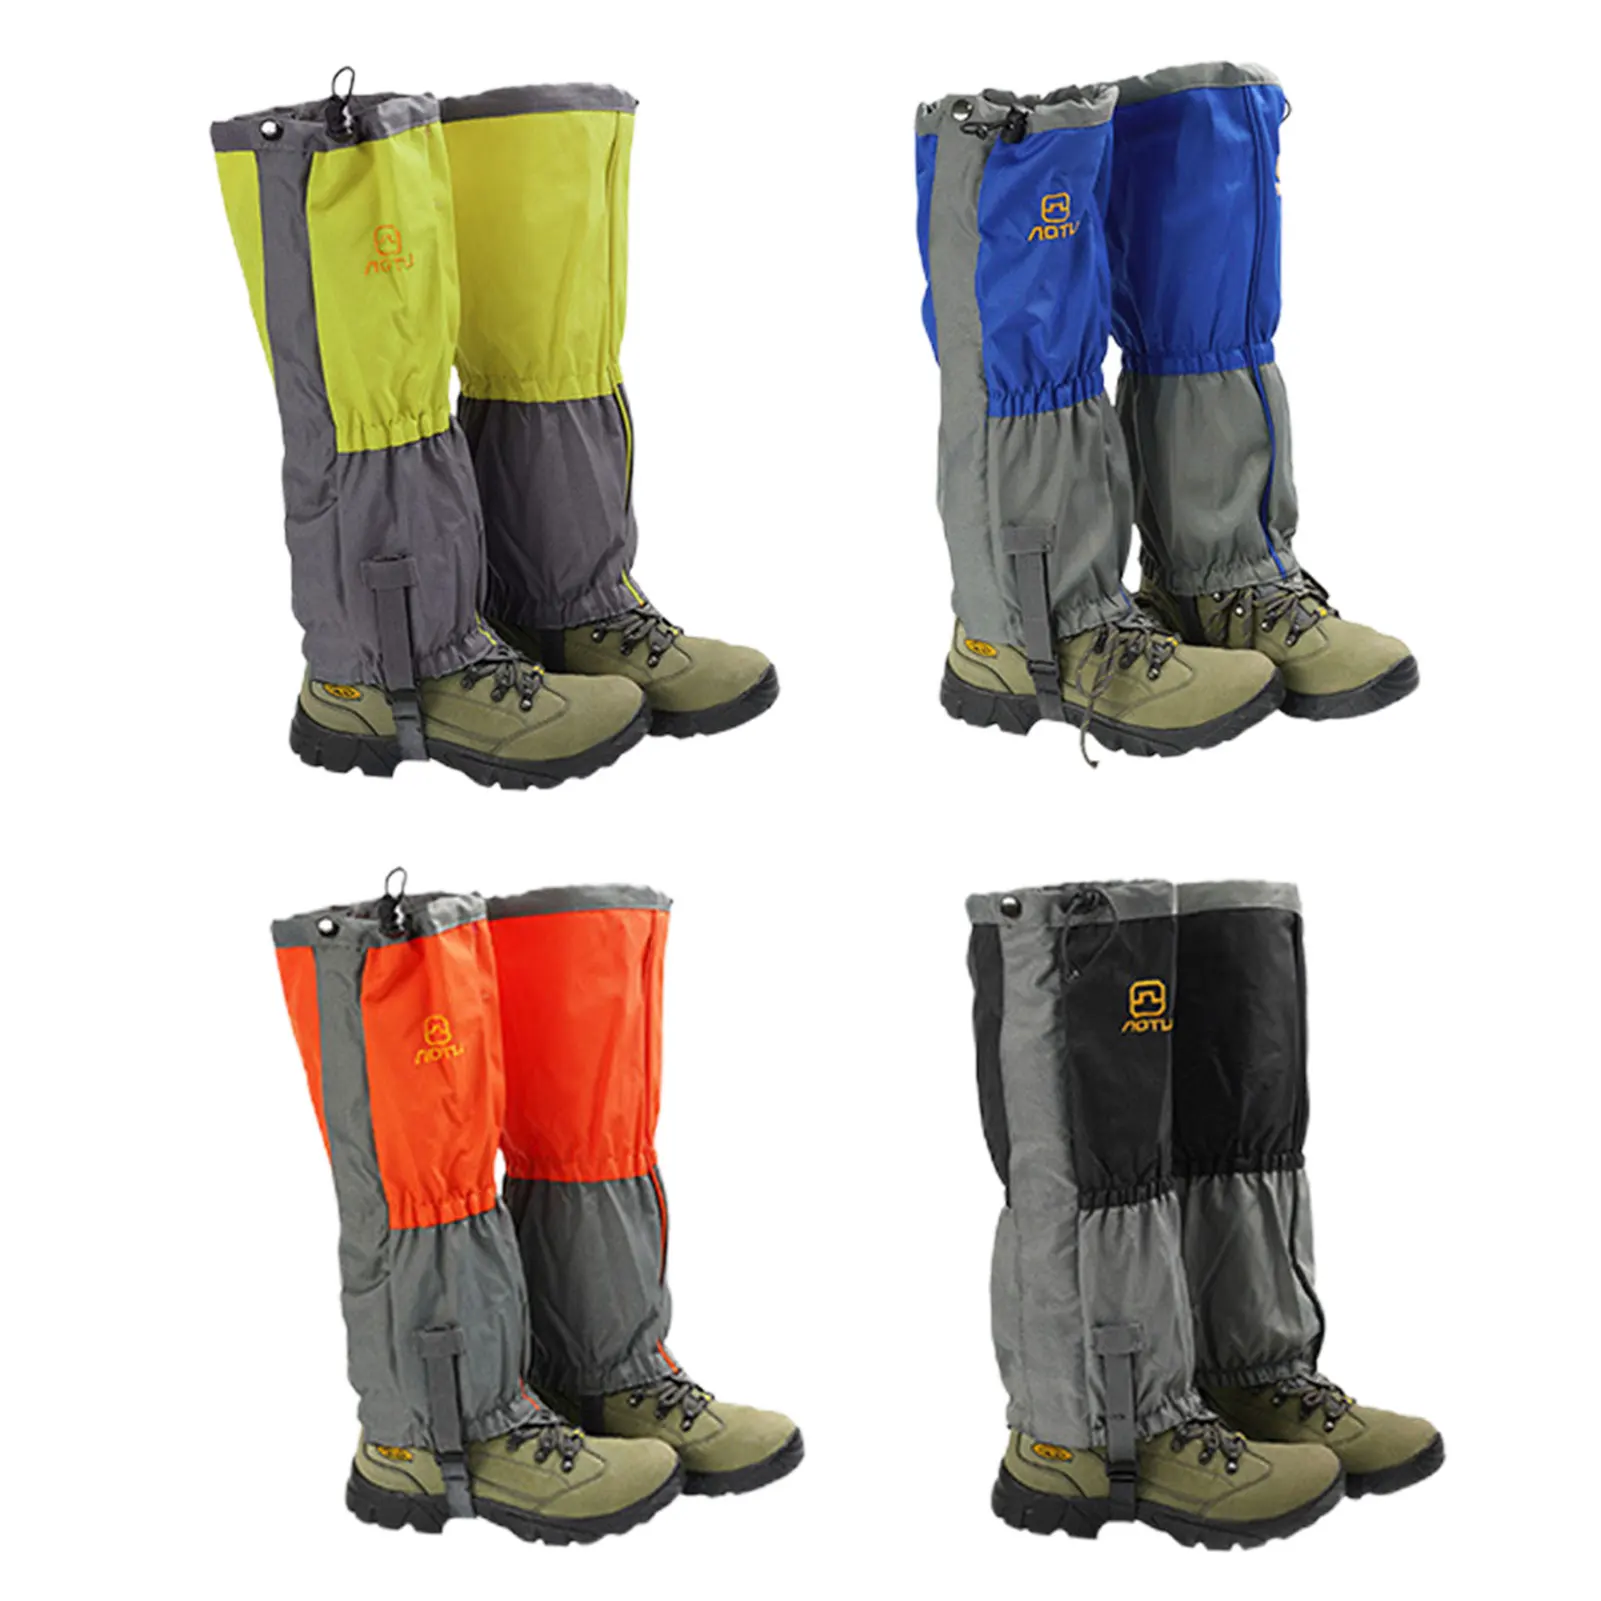 

Waterproof Leg Covers Unisex Leg Gaiters Foot Cover For Mountaineering Skiing Ski Boot Travel Shoe Snow Gaiters Legs Protection